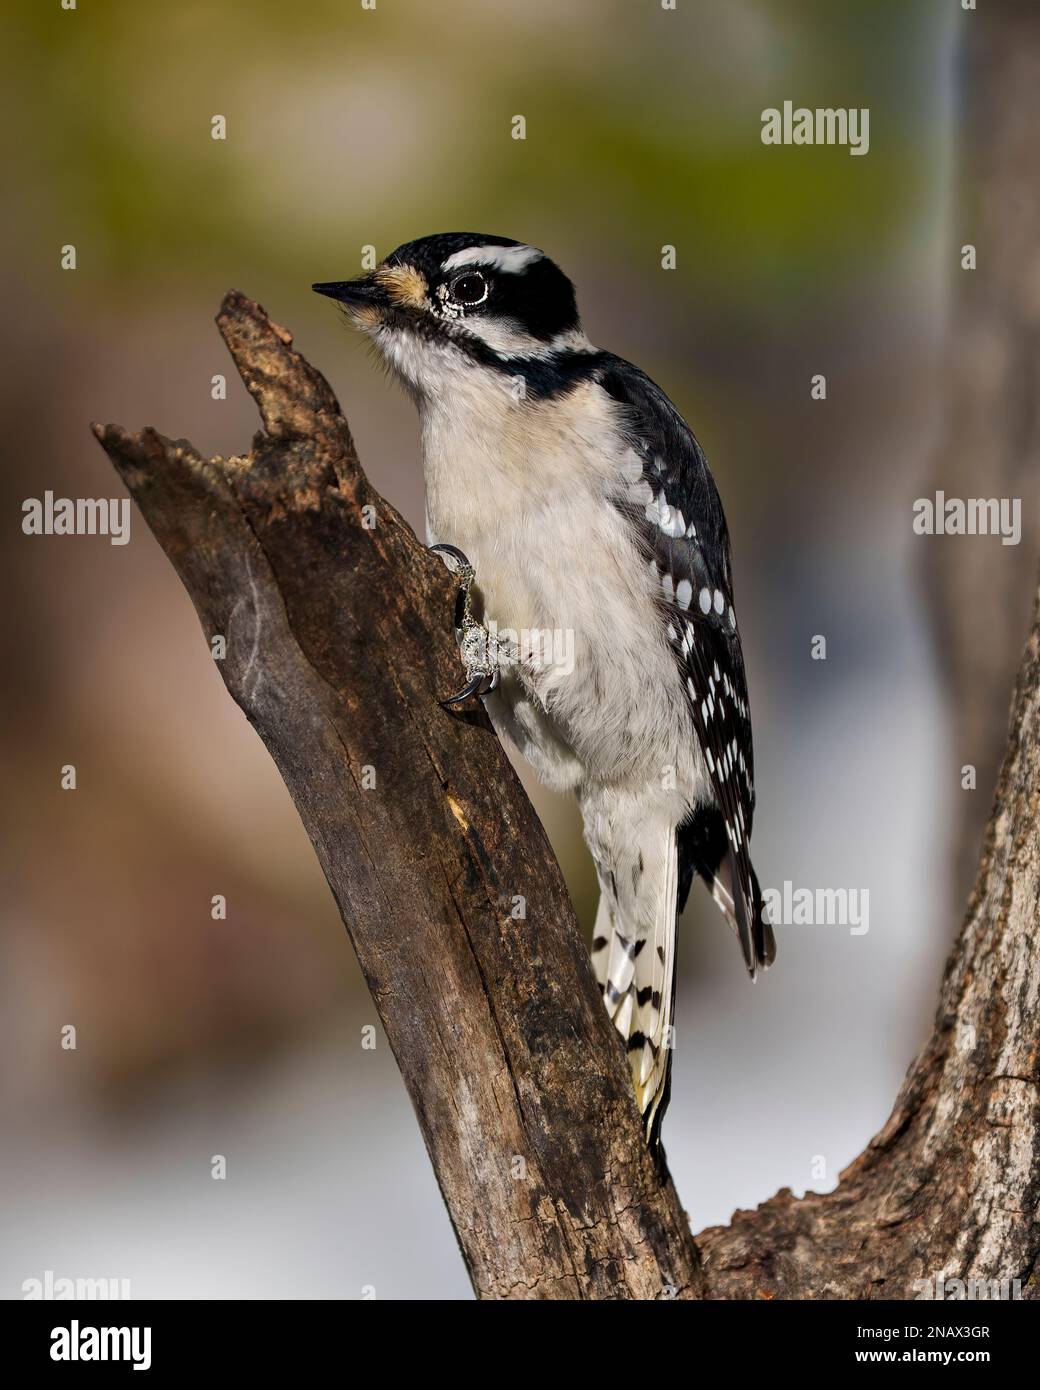 Woodpecker female on a branch foraging for food with a blur background in its environment and habitat surrounding. Stock Photo